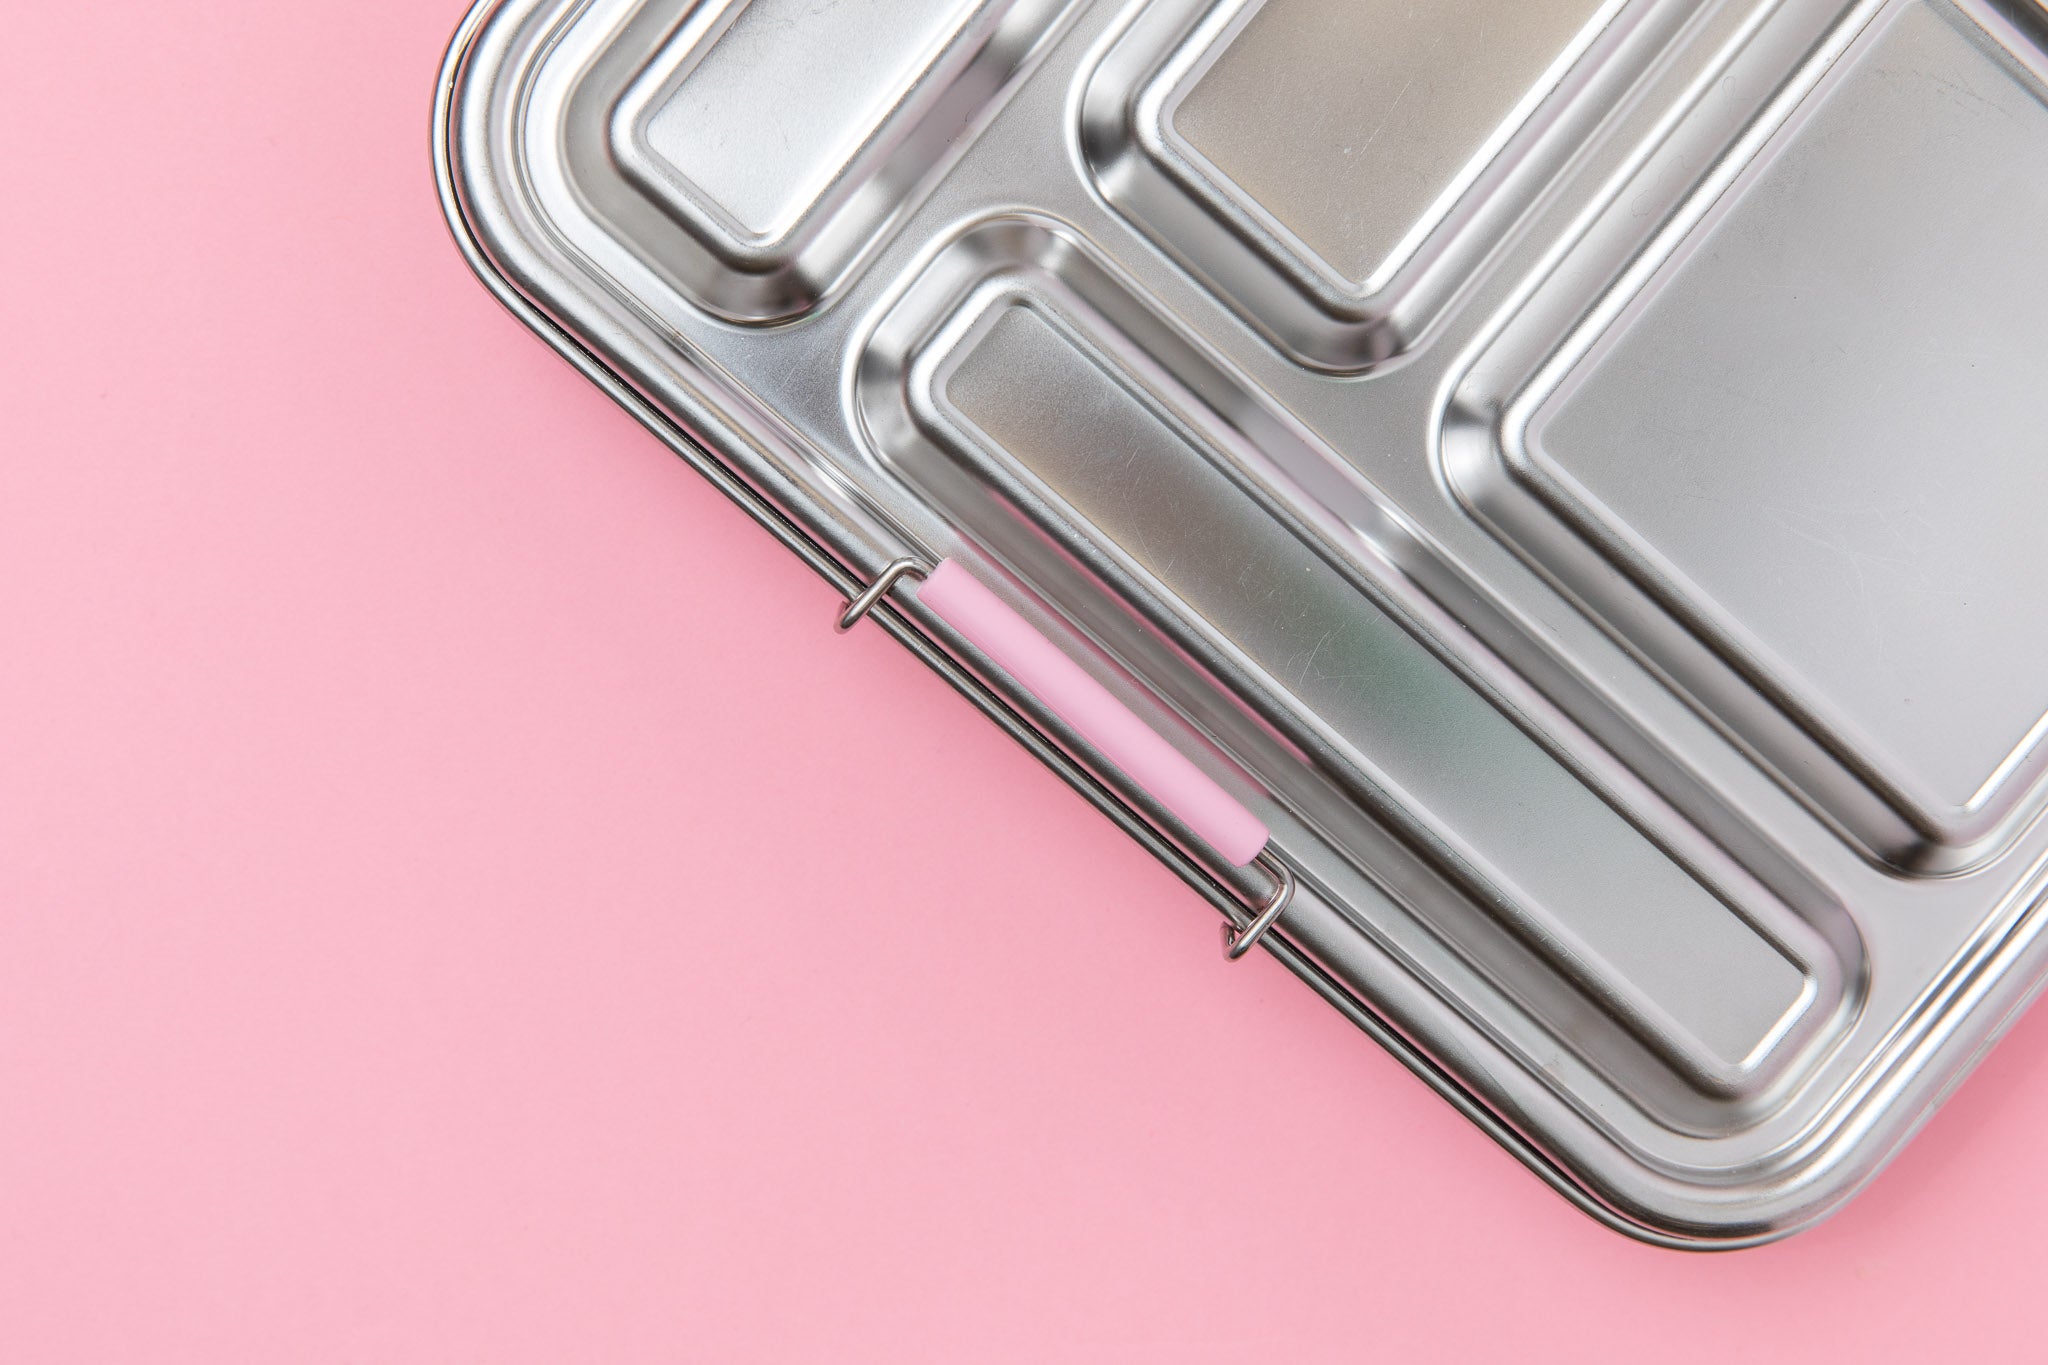 stainless steel leak proof lunchbox with light pink silicone seal on lid - nudie rudie lunch box